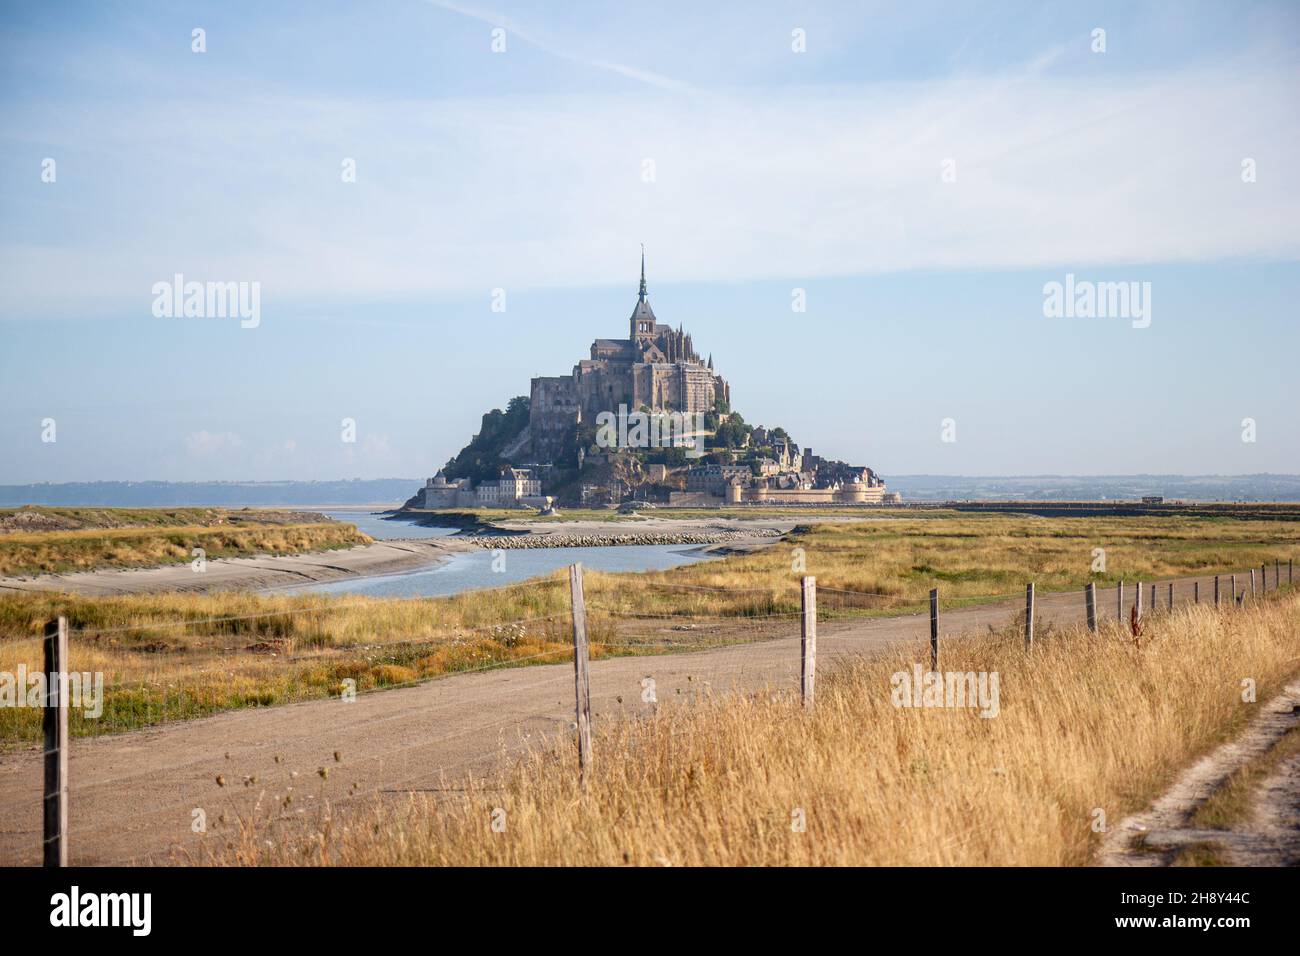 Mont Saint-Michel looking over a footpath and some grassland at the mouth of the Couesnon river, France Stock Photo